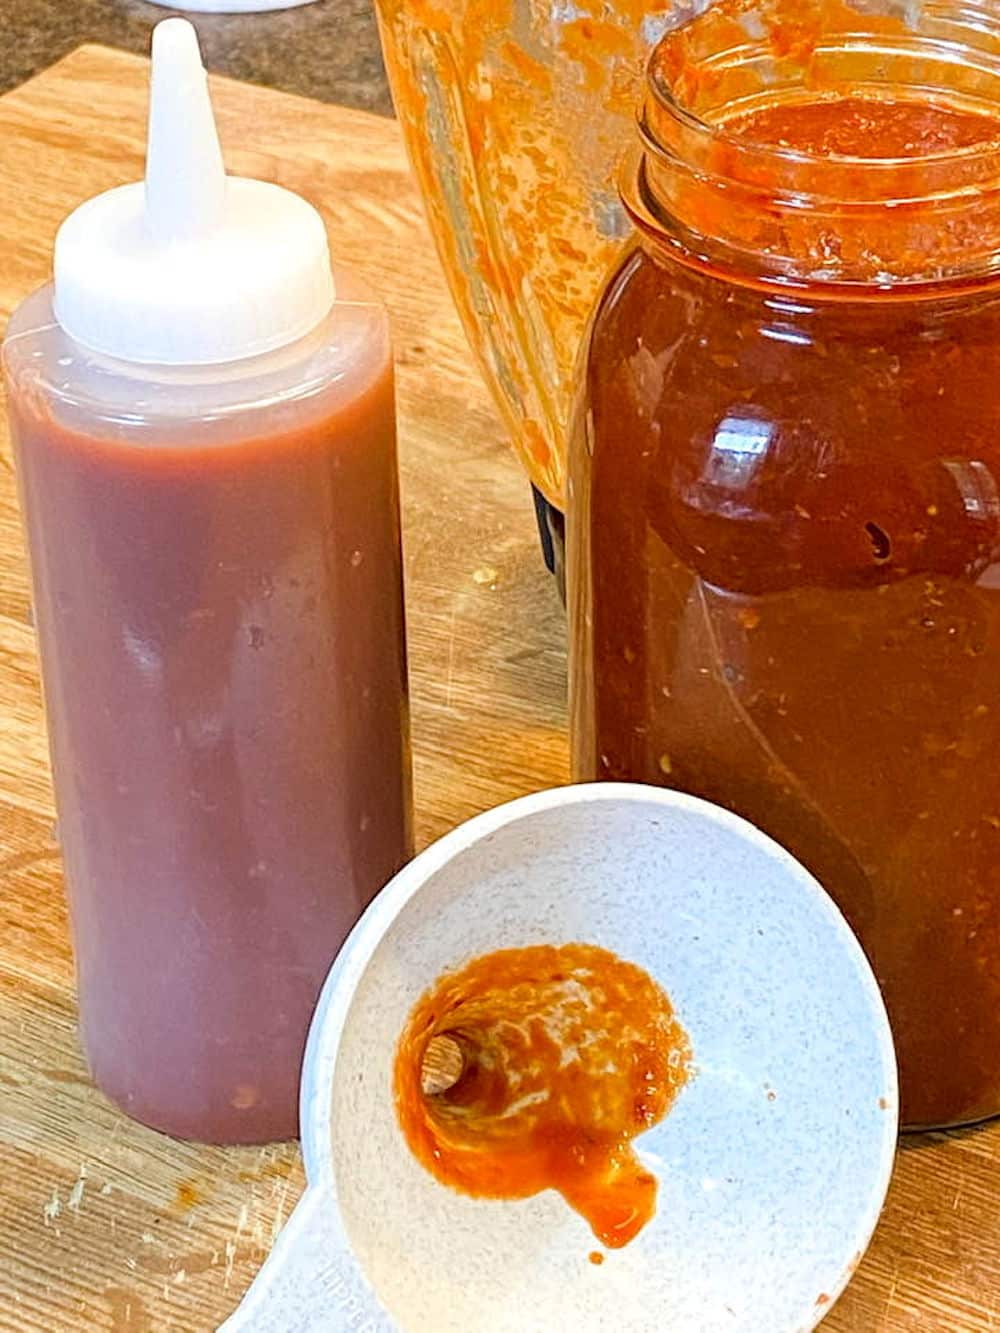 24Bite: Homemade spicy barbecue sauce made from dried red chiles and tomato in quart jar